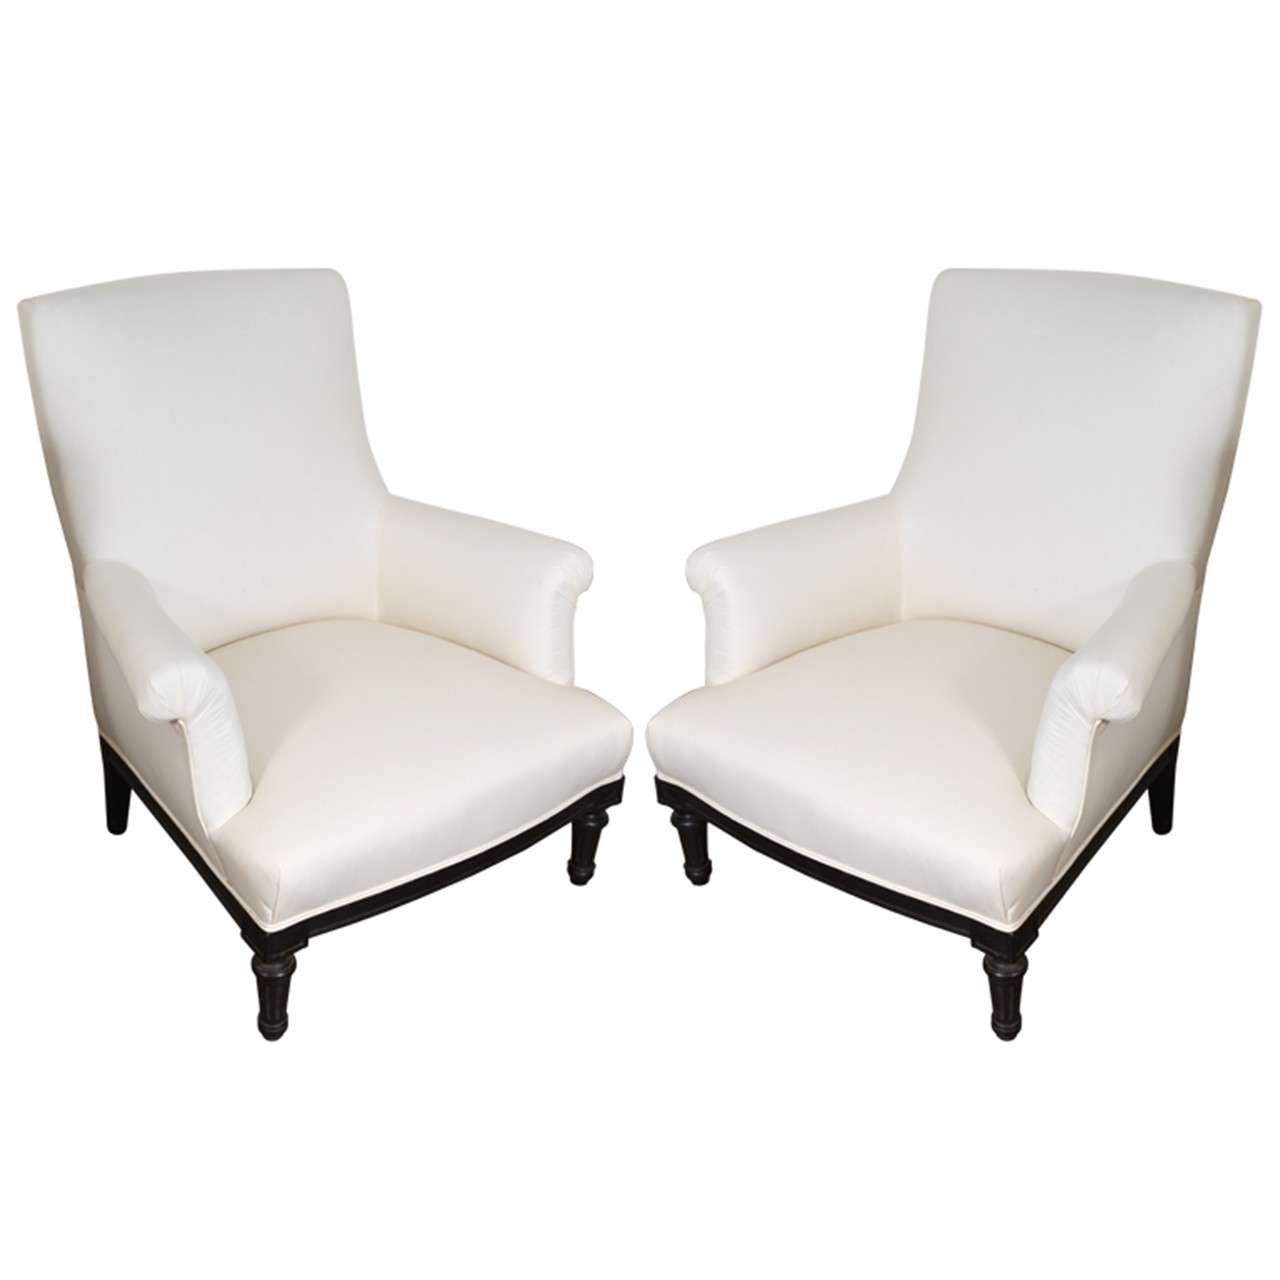 19th Century Pair of Upholstered Club Chairs